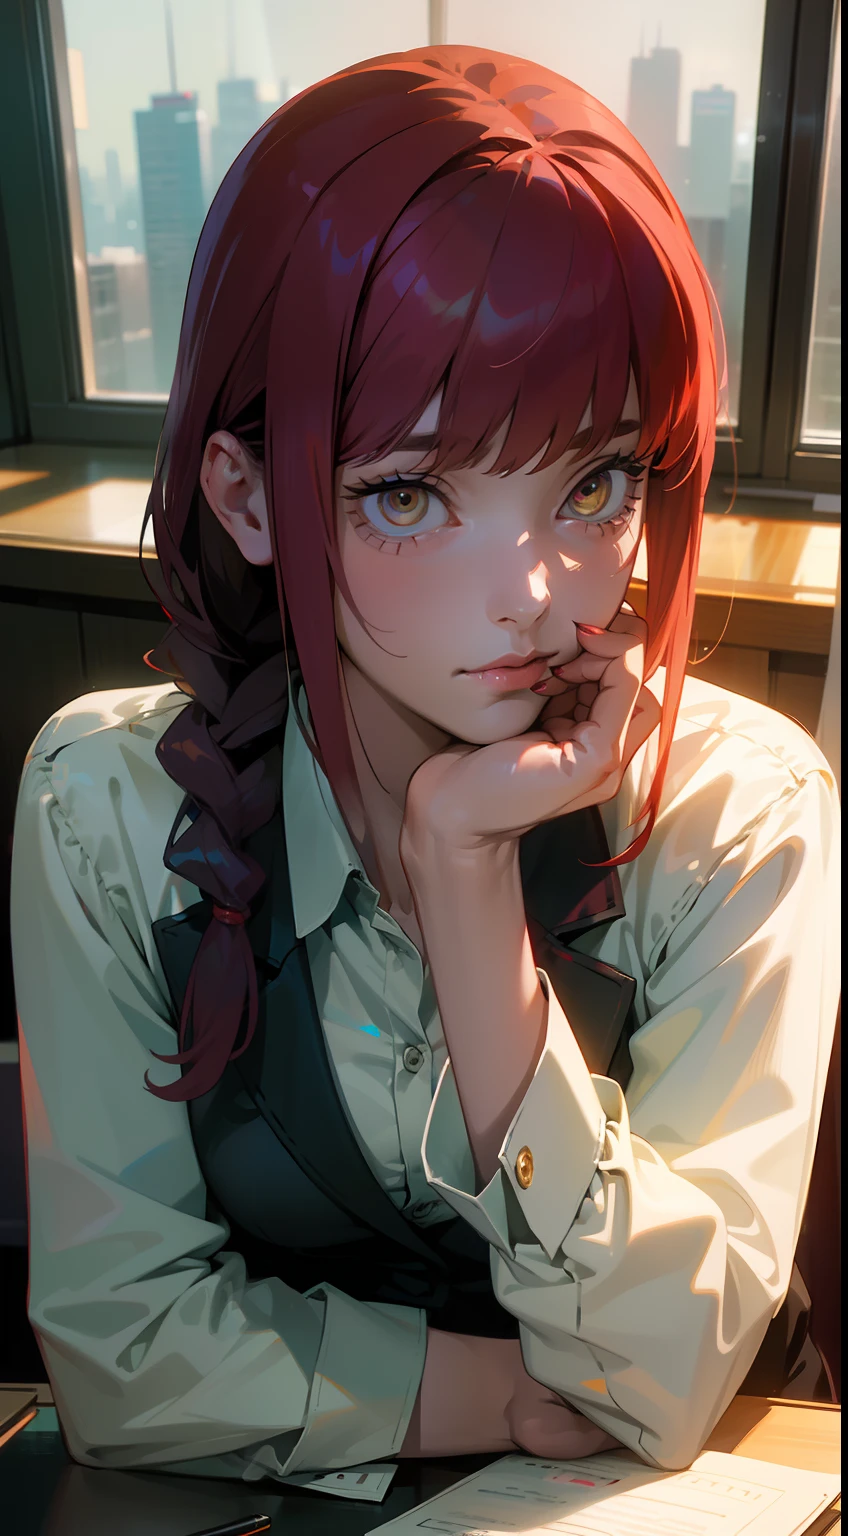 (best quality,realistic:1.37),ultra-detailed,professional,portrait,sharp focus,physically-based rendering,studio lighting,vivid colors,bokeh,photorealistic,photography,red theme,lighting effects, Makima from Chainsaw Man anime, detailed facial features,beautiful eyes,expressive look,rosy cheeks,dark makeup,long nails,classy appearance,determined expression,focused gaze,sophisticated,confident pose,modern office scene,high-rise city view,glass windows,city lights,computer monitors and keyboards,office desk with papers,phone on the desk,books and folders neatly arranged,professional attire,well-fitted blazer,button-up shirt,pencil skirt,high-heeled shoes,stylish accessories,wristwatch,handbag,sleek hairstyle,polished appearance.